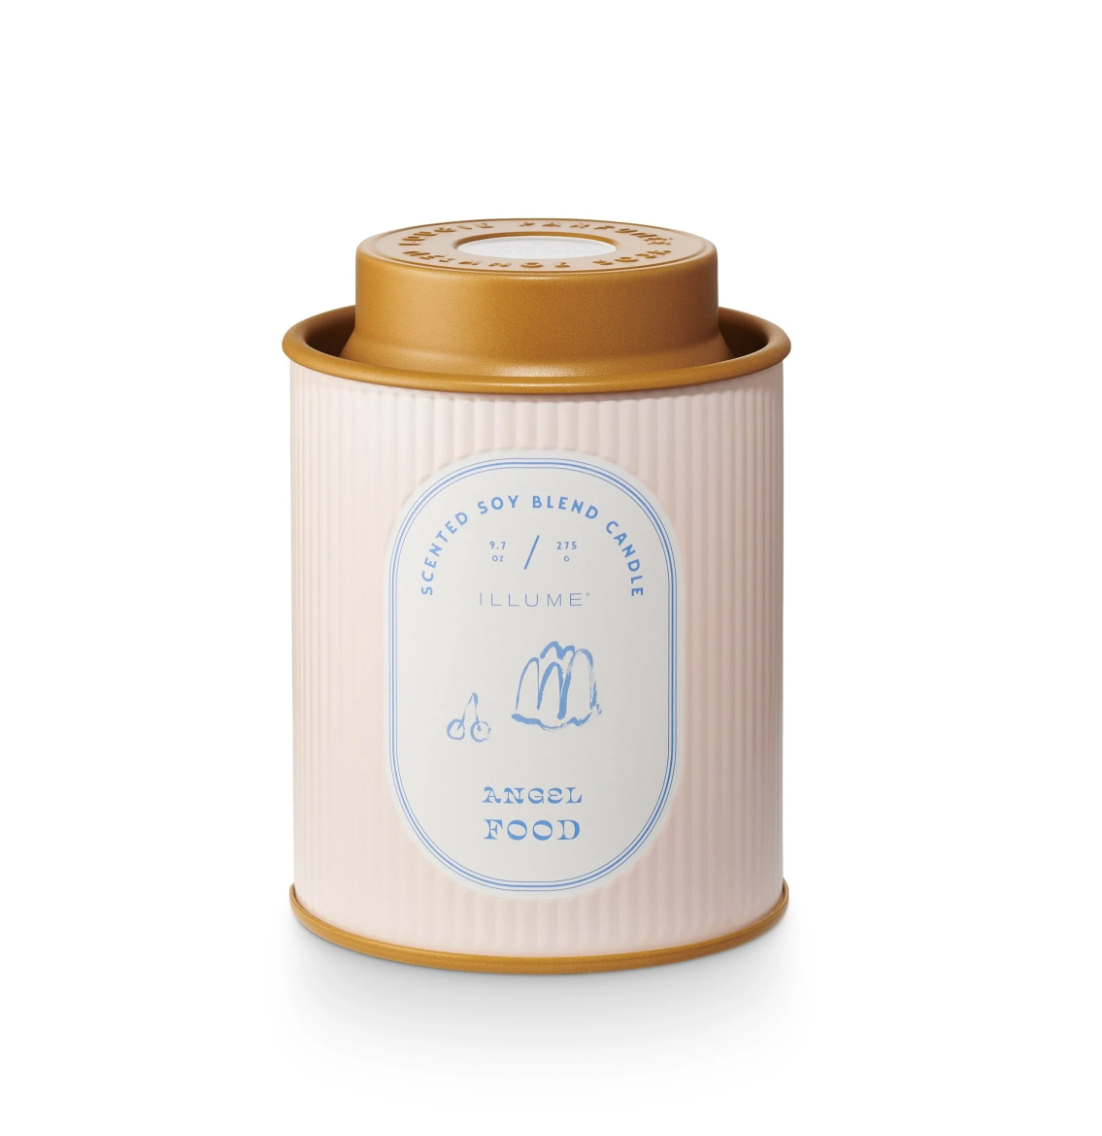 An elegant Illume soy blend candle in a cylindrical beige container with a gold lid, labeled "Bungalow Angel Food" in blue print, isolated on a white background.